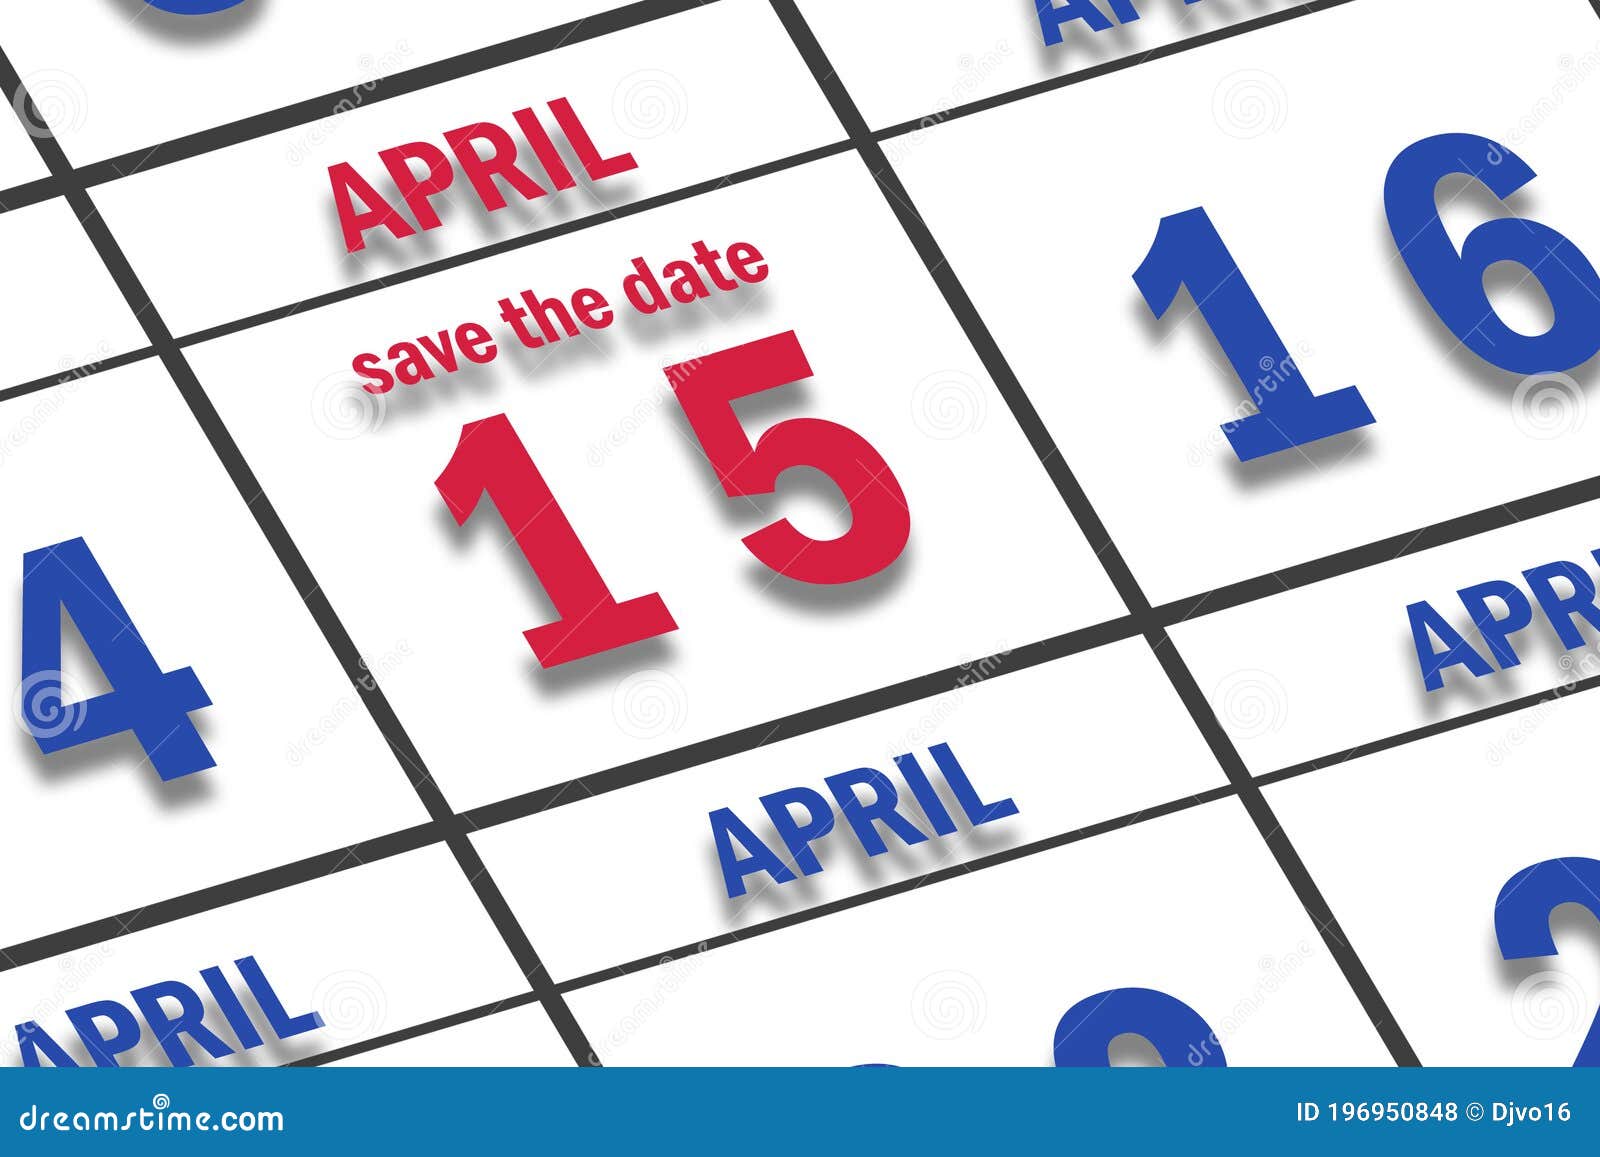 April 15th. Day 15 of Month, Date Marked Save the Date on a Calendar